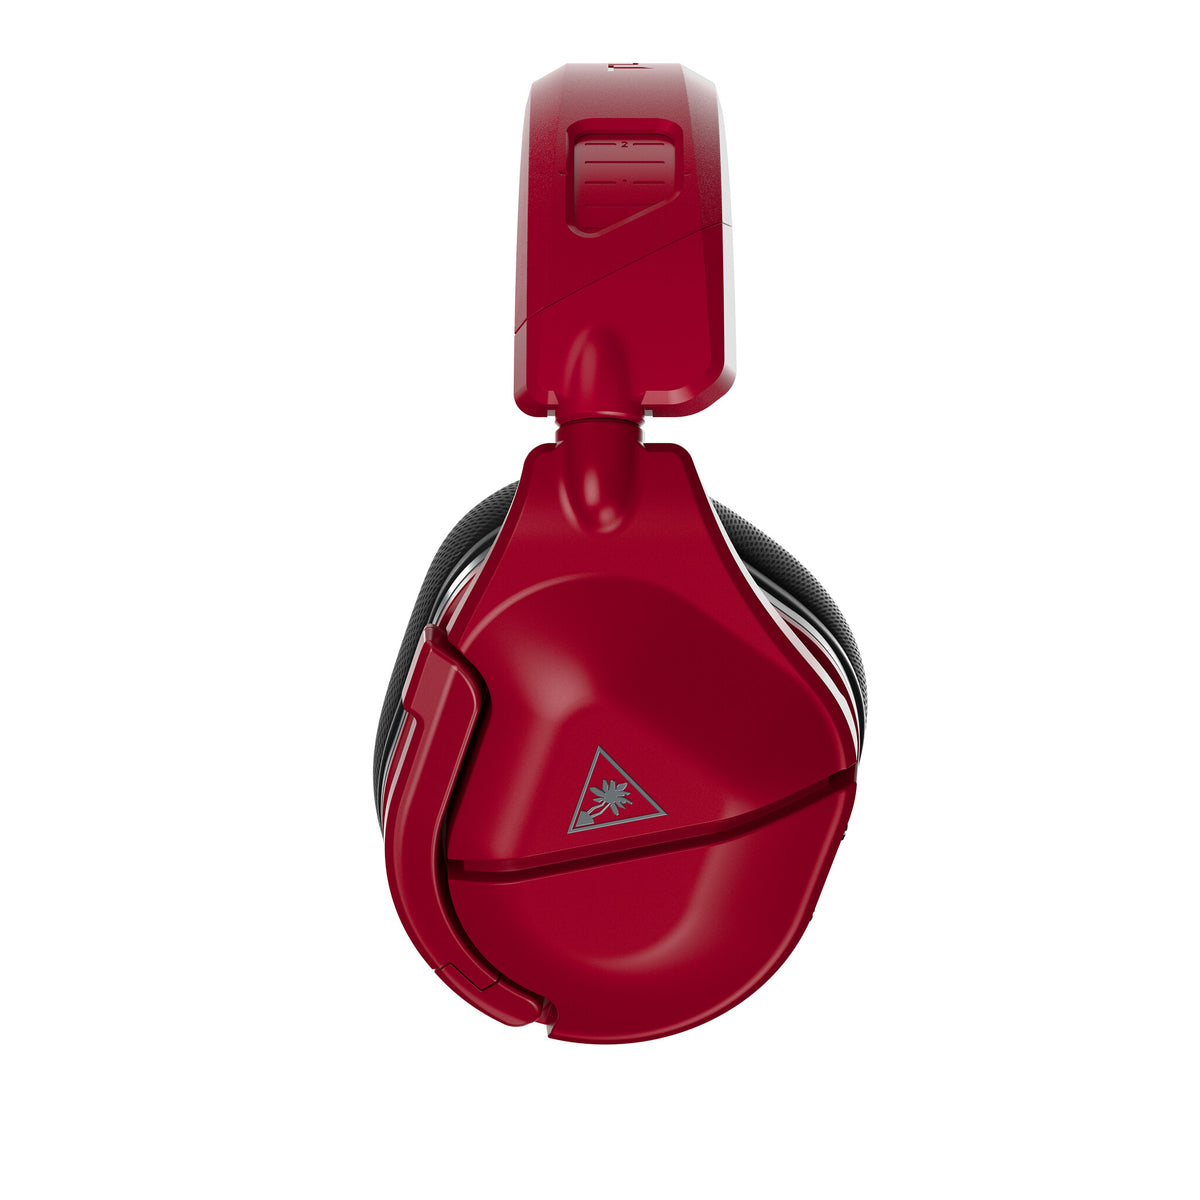 Turtle Beach Stealth 600 Gen 2 MAX - USB Type-C Wired &amp; Bluetooth Wireless Gaming Headset in Red